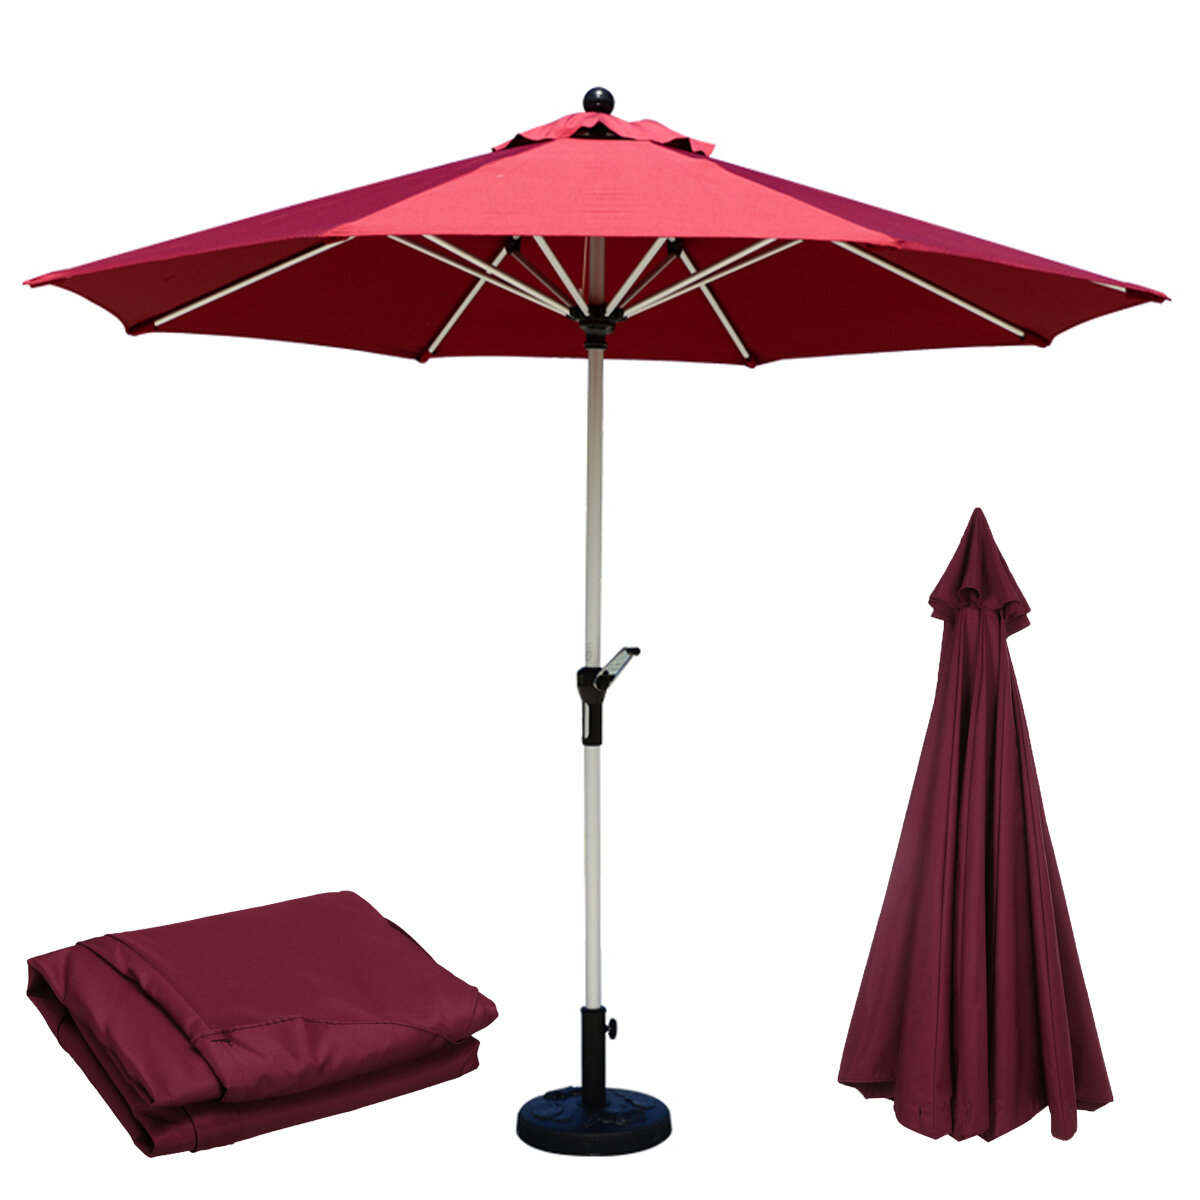 Image of 27m 8 Arm Parasol Canopy Cover Waterproof Awning Sun Shade Shelter Outdoor Garden Patio